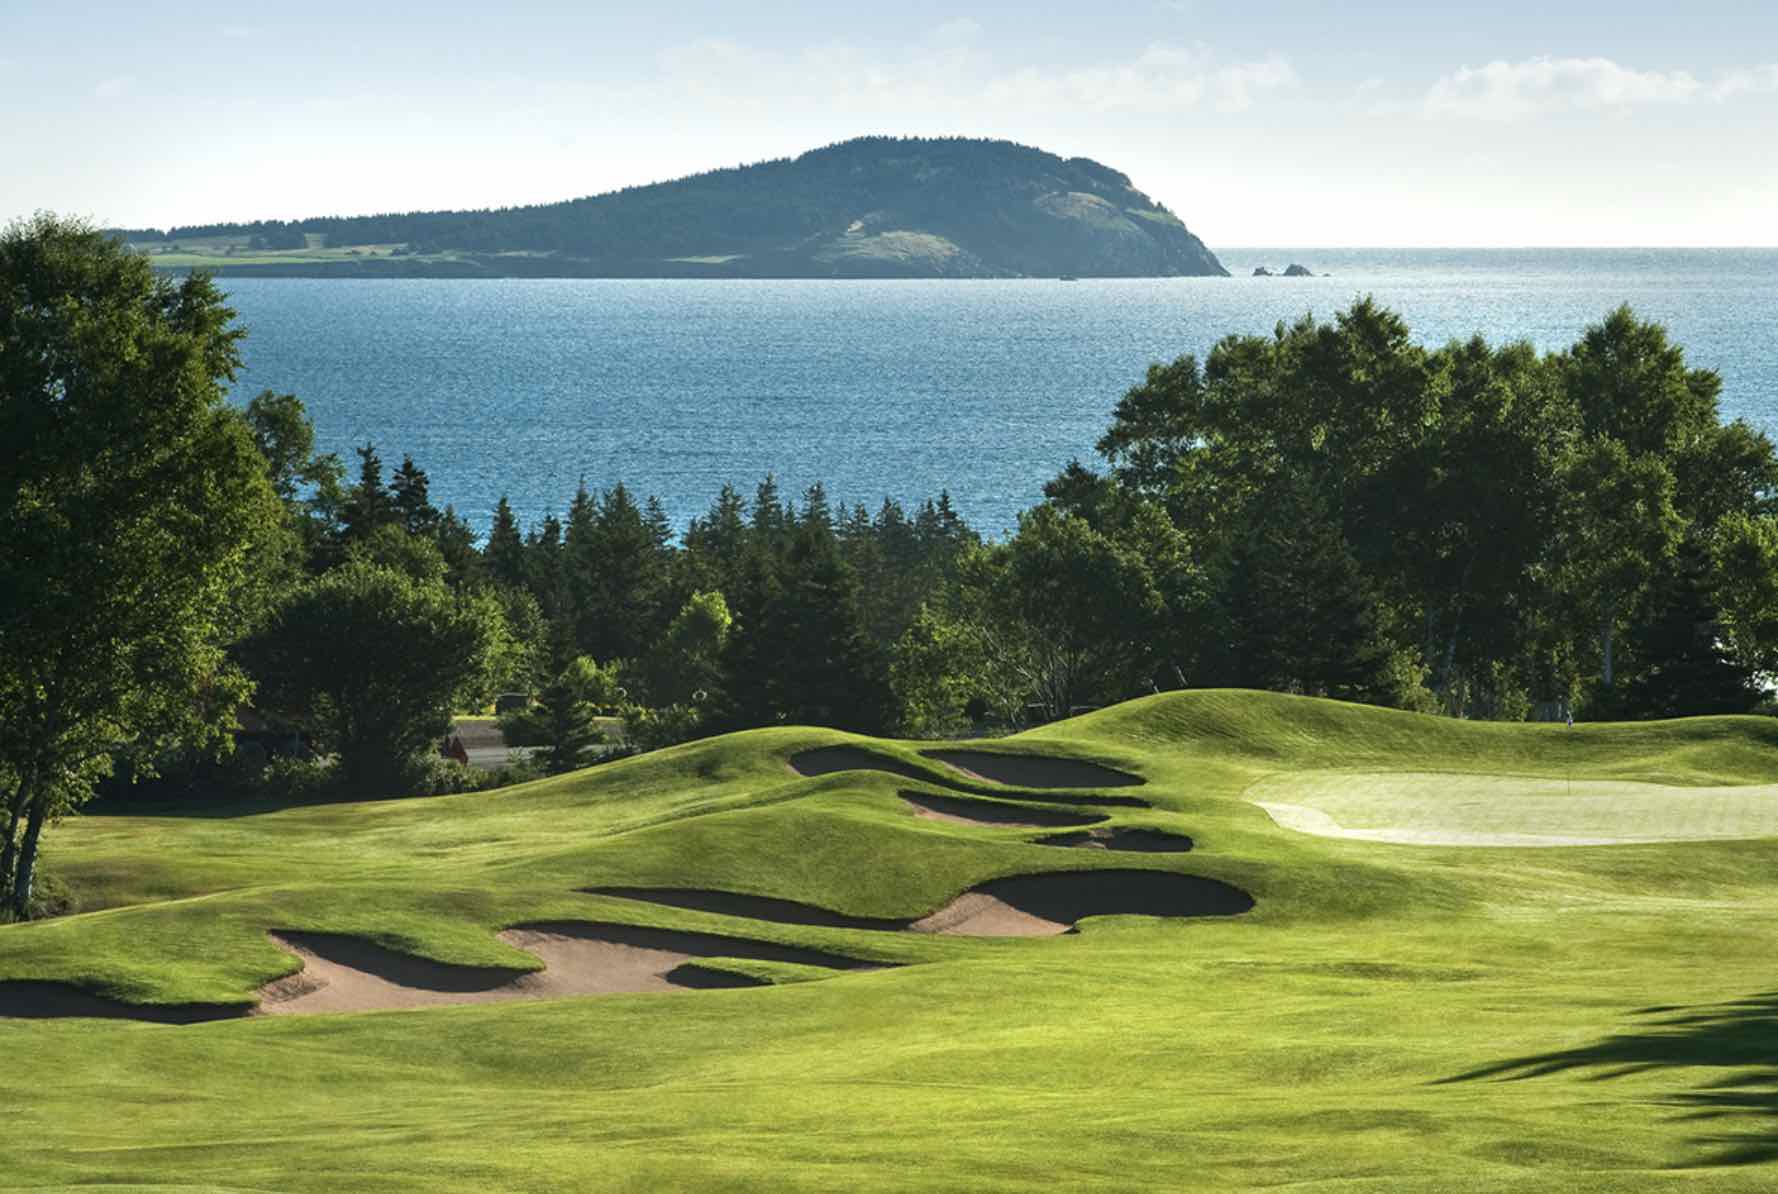 The golf course at Keltic Lodge with ocean view